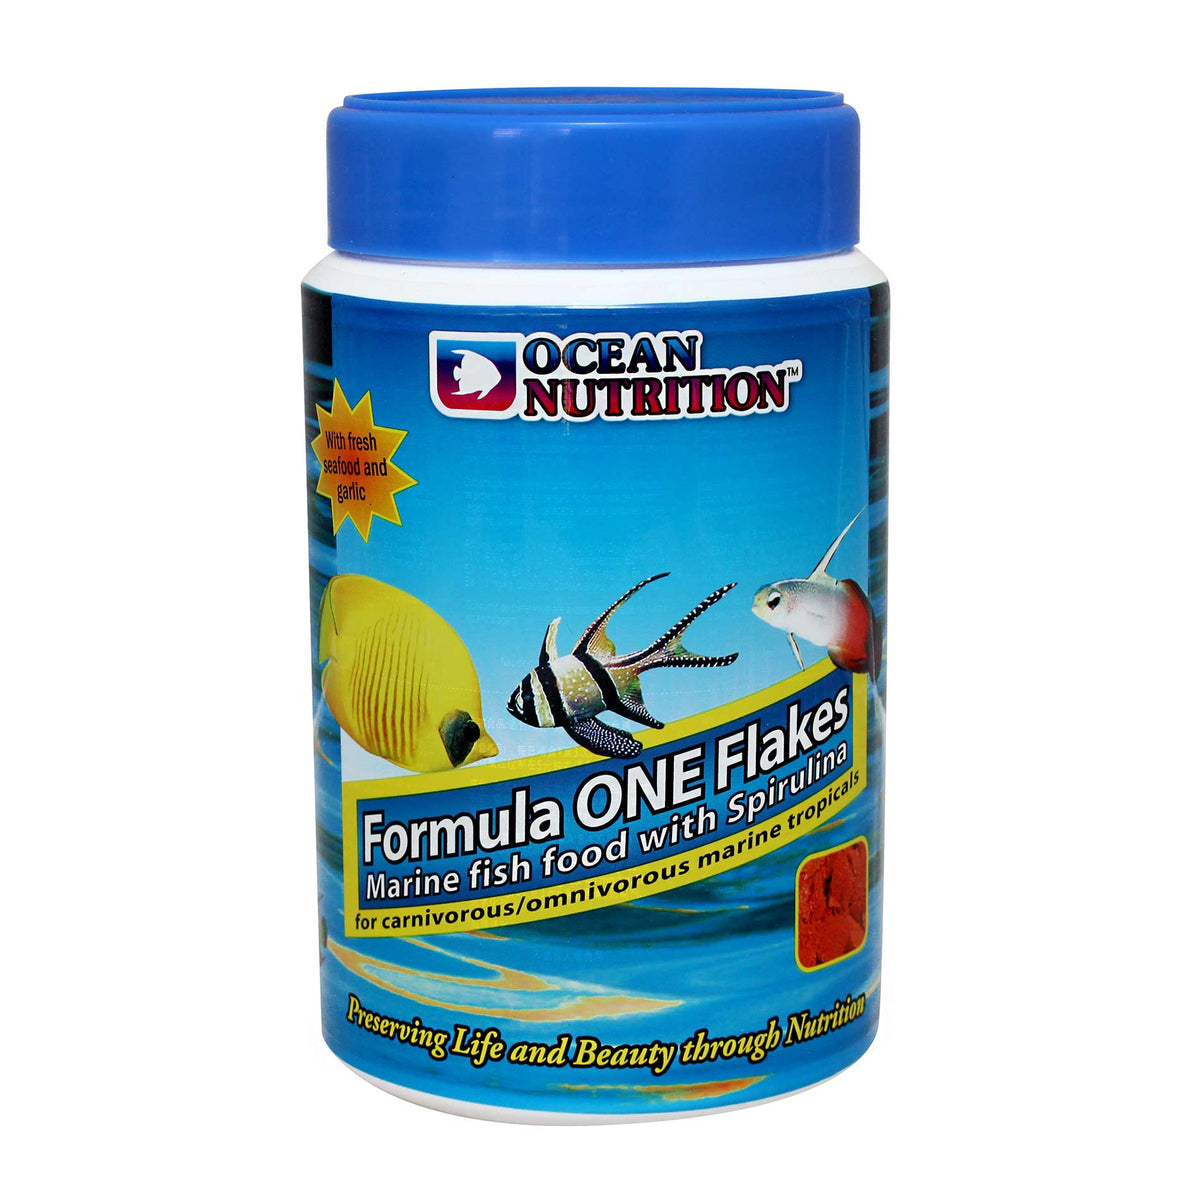 Ocean Nutrition Formula One Flakes for Marine Fish